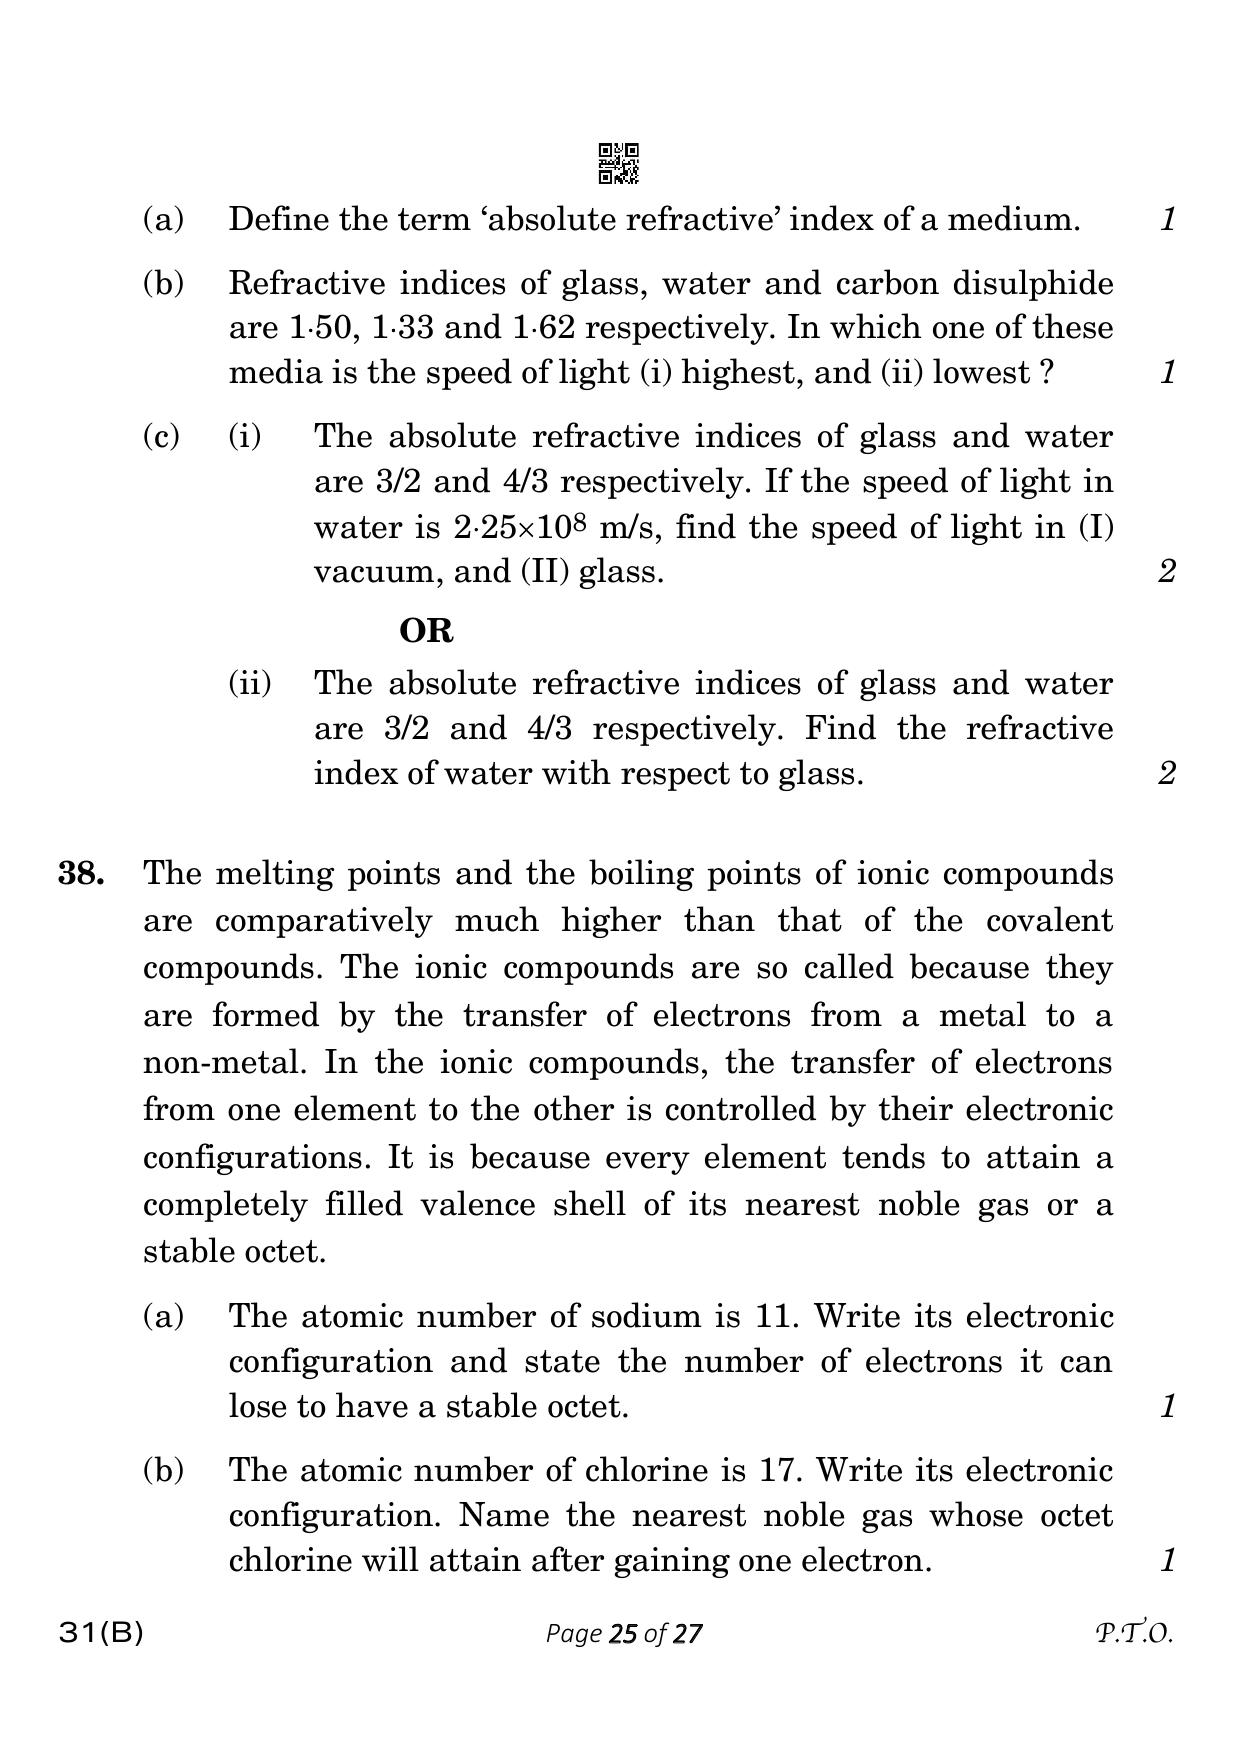 CBSE Class 10 31-B Science 2023 (Compartment) Question Paper - Page 25